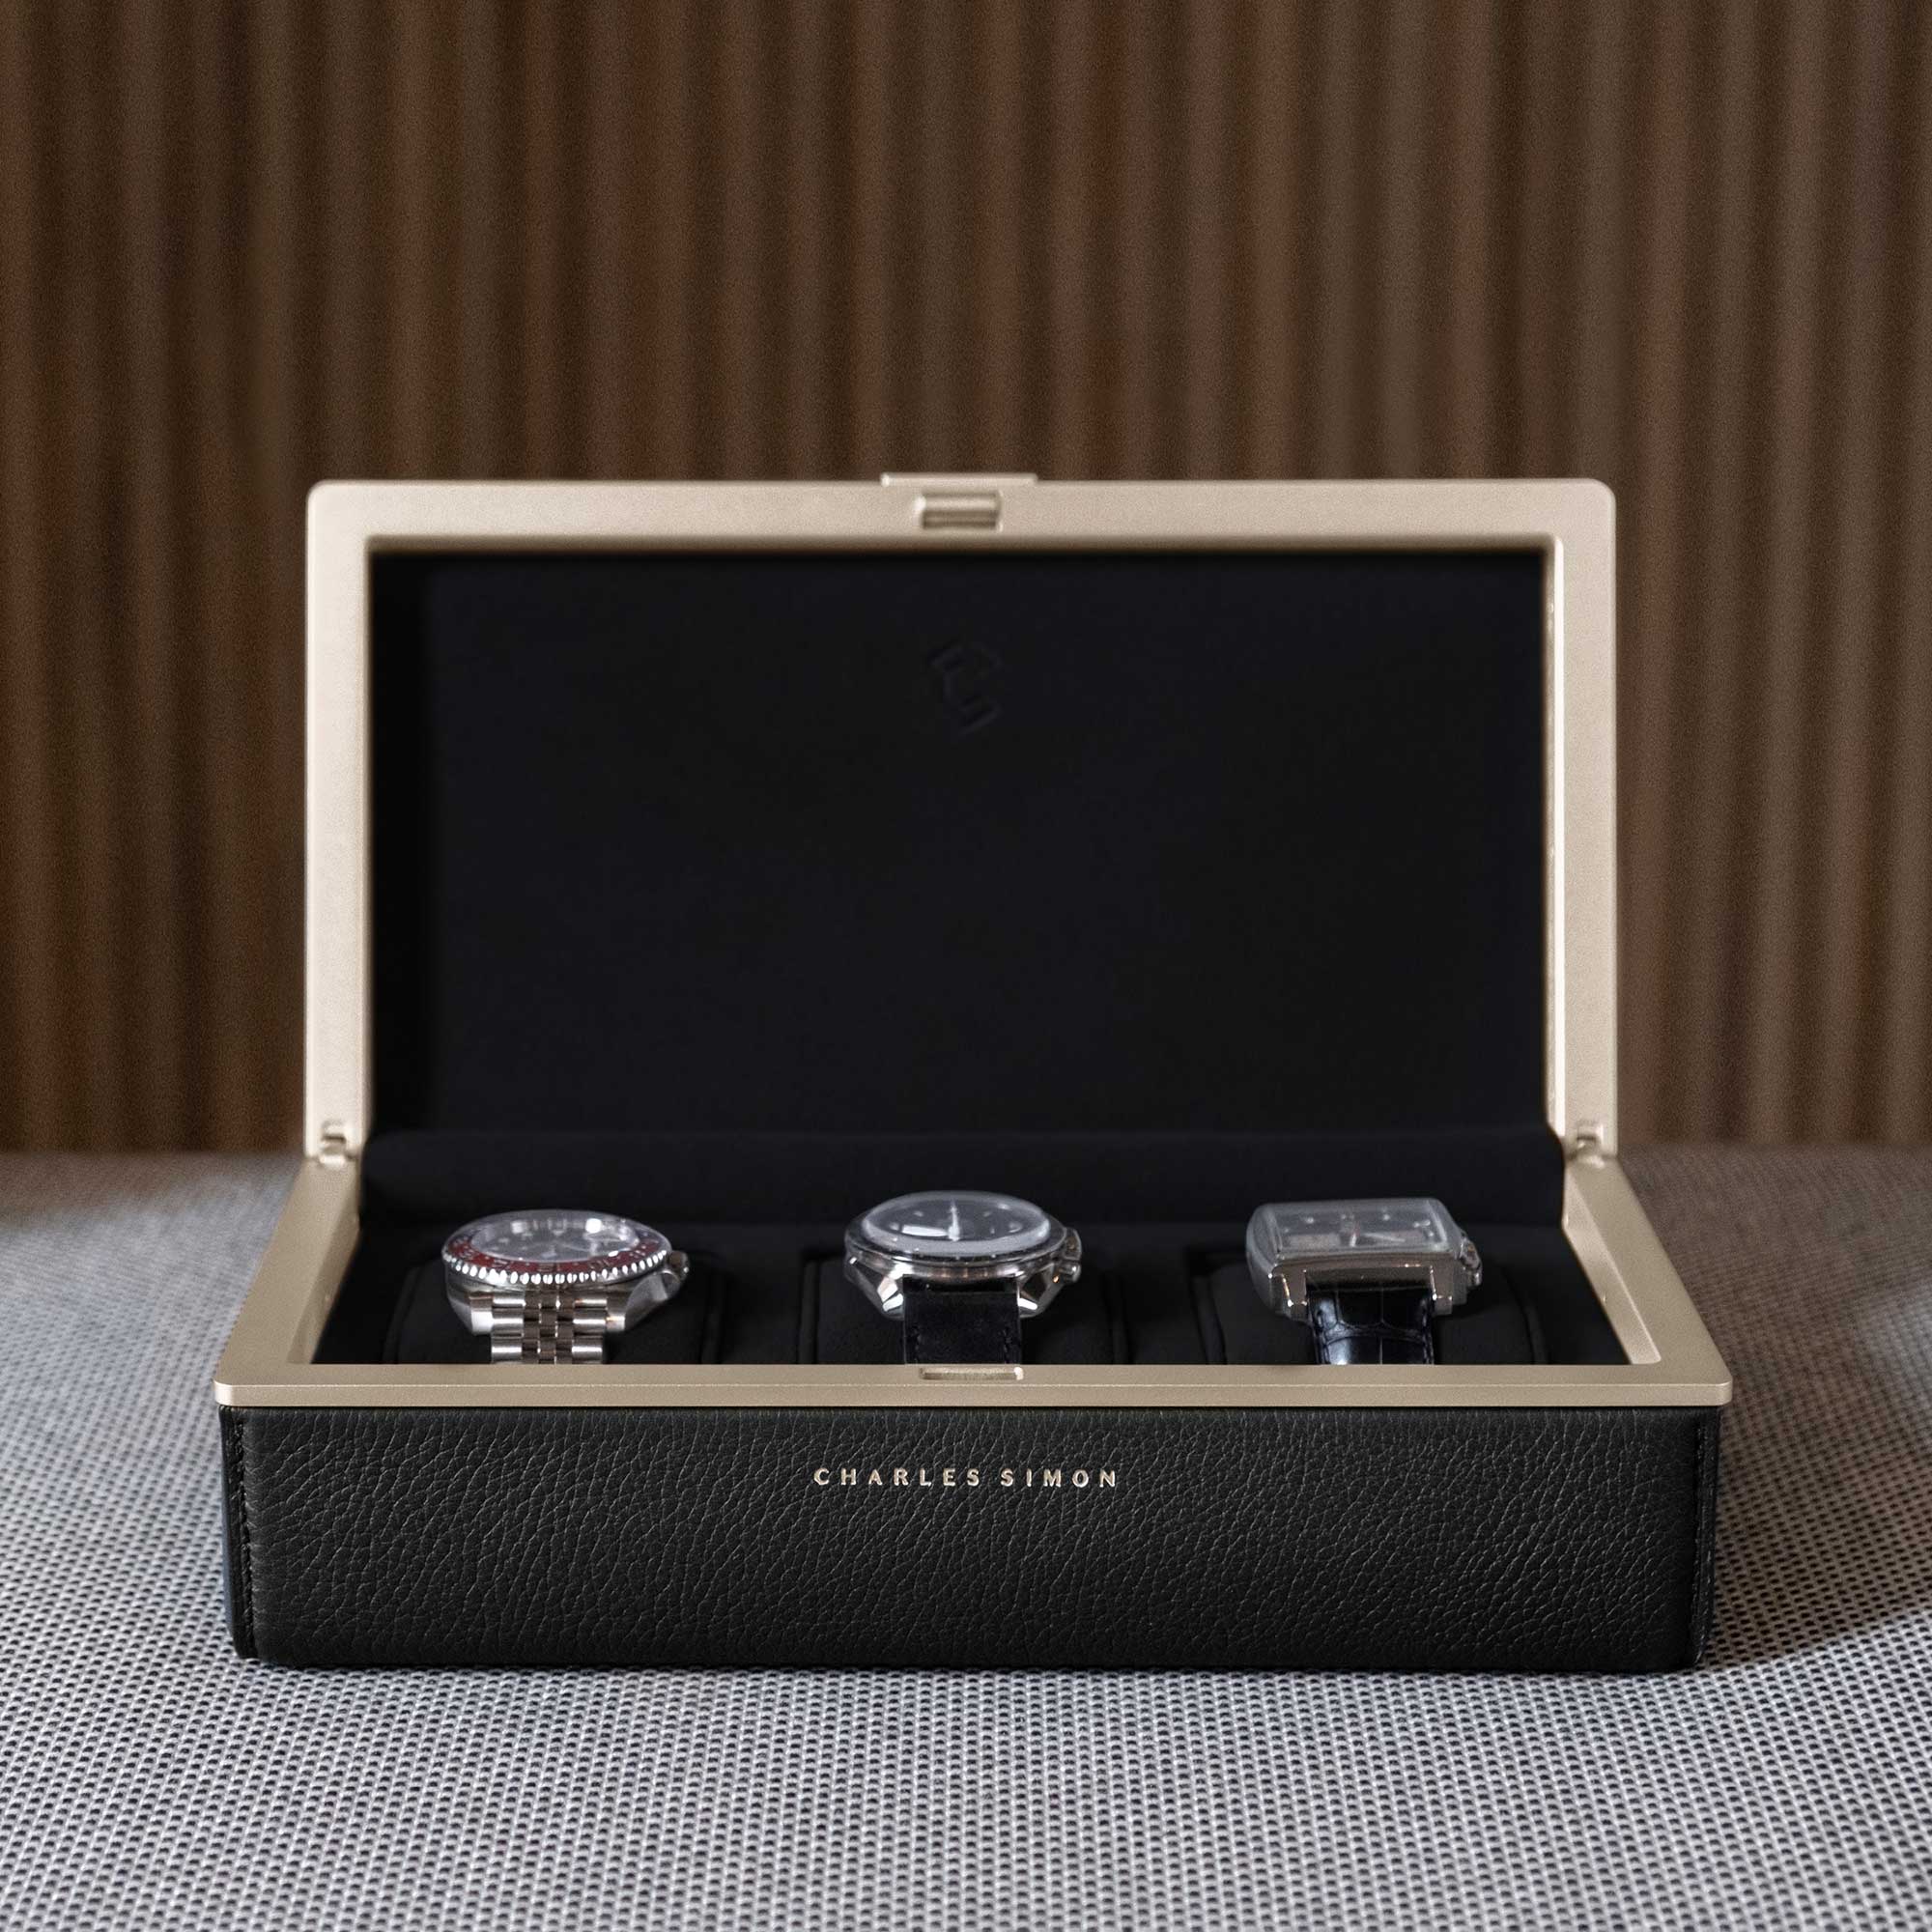 3 luxury watches elegantly displayed in the Eaton 3 Watch case in gold casing and black leather. 